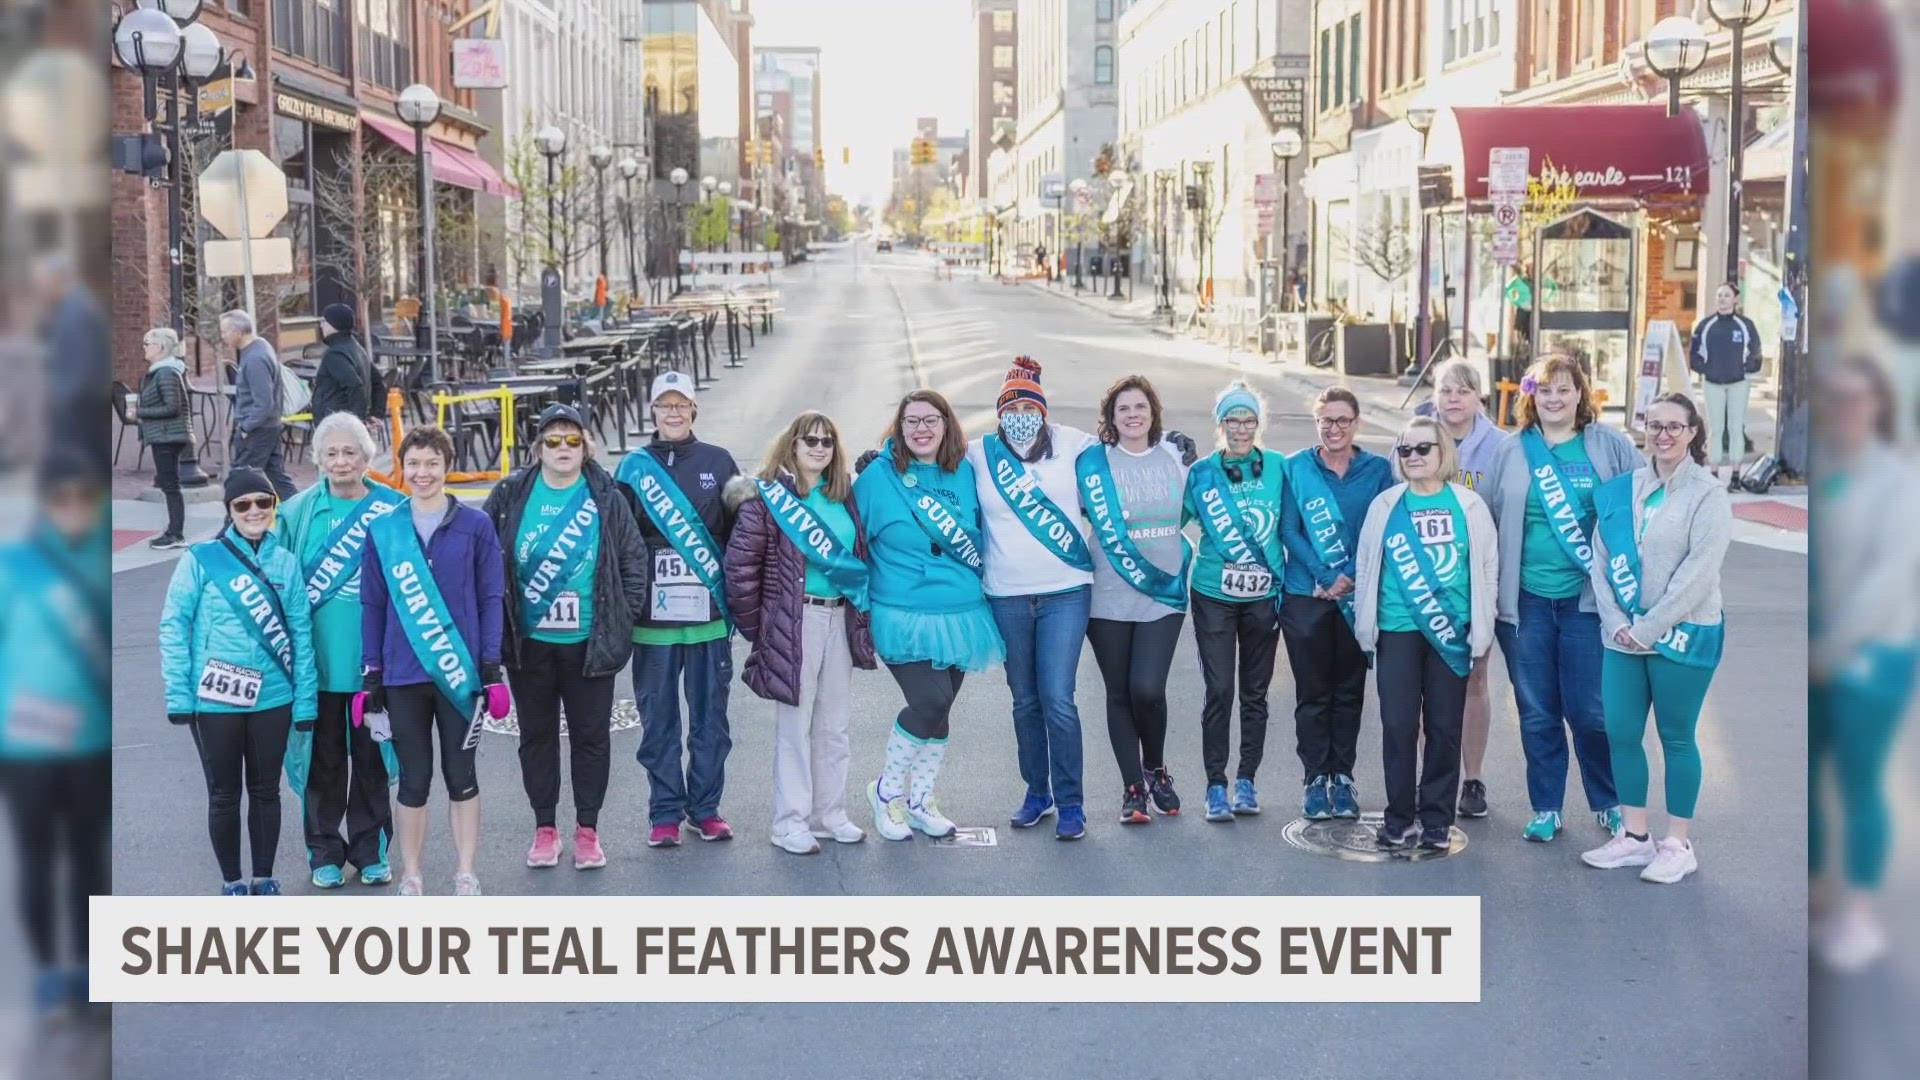 The Shake Your Teal Feathers walk/run is on September 24th.